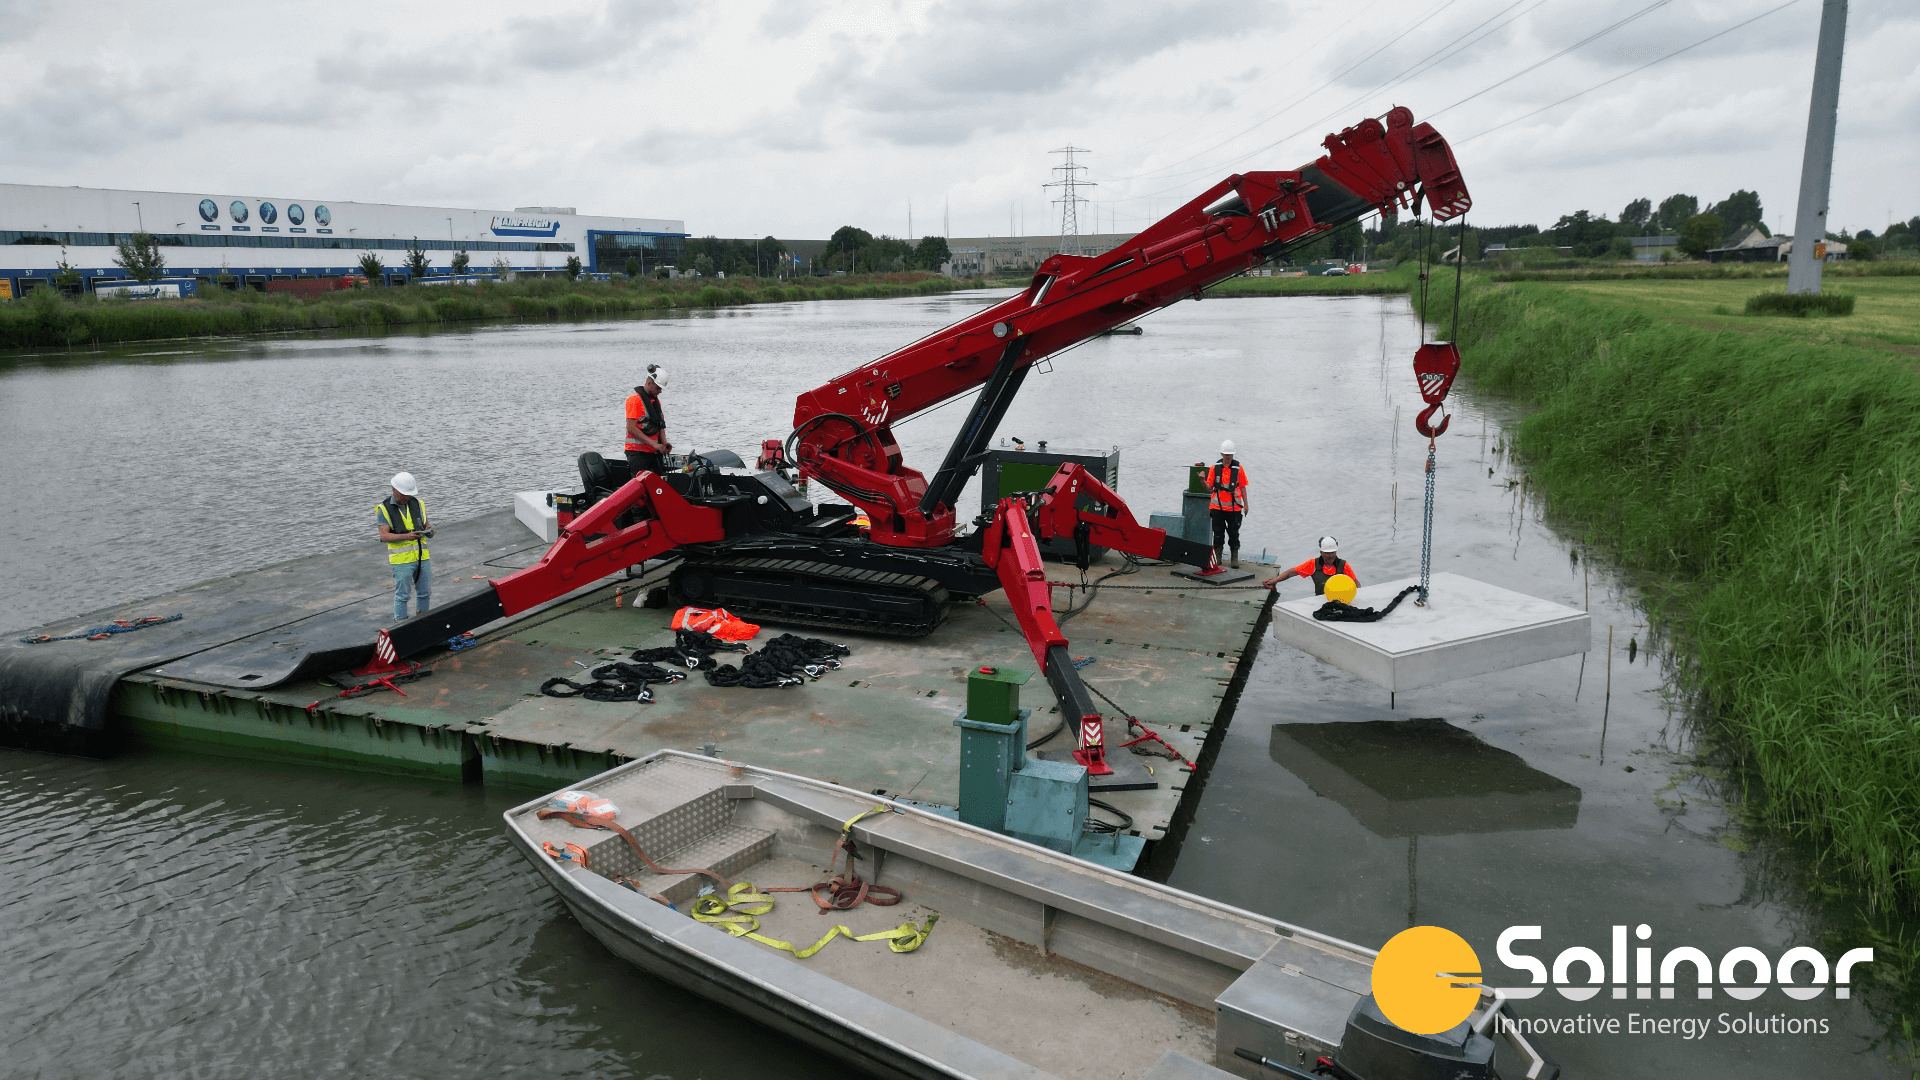 Concrete anchoring works of the floating solar park in Zaltbommel, the Netherlands